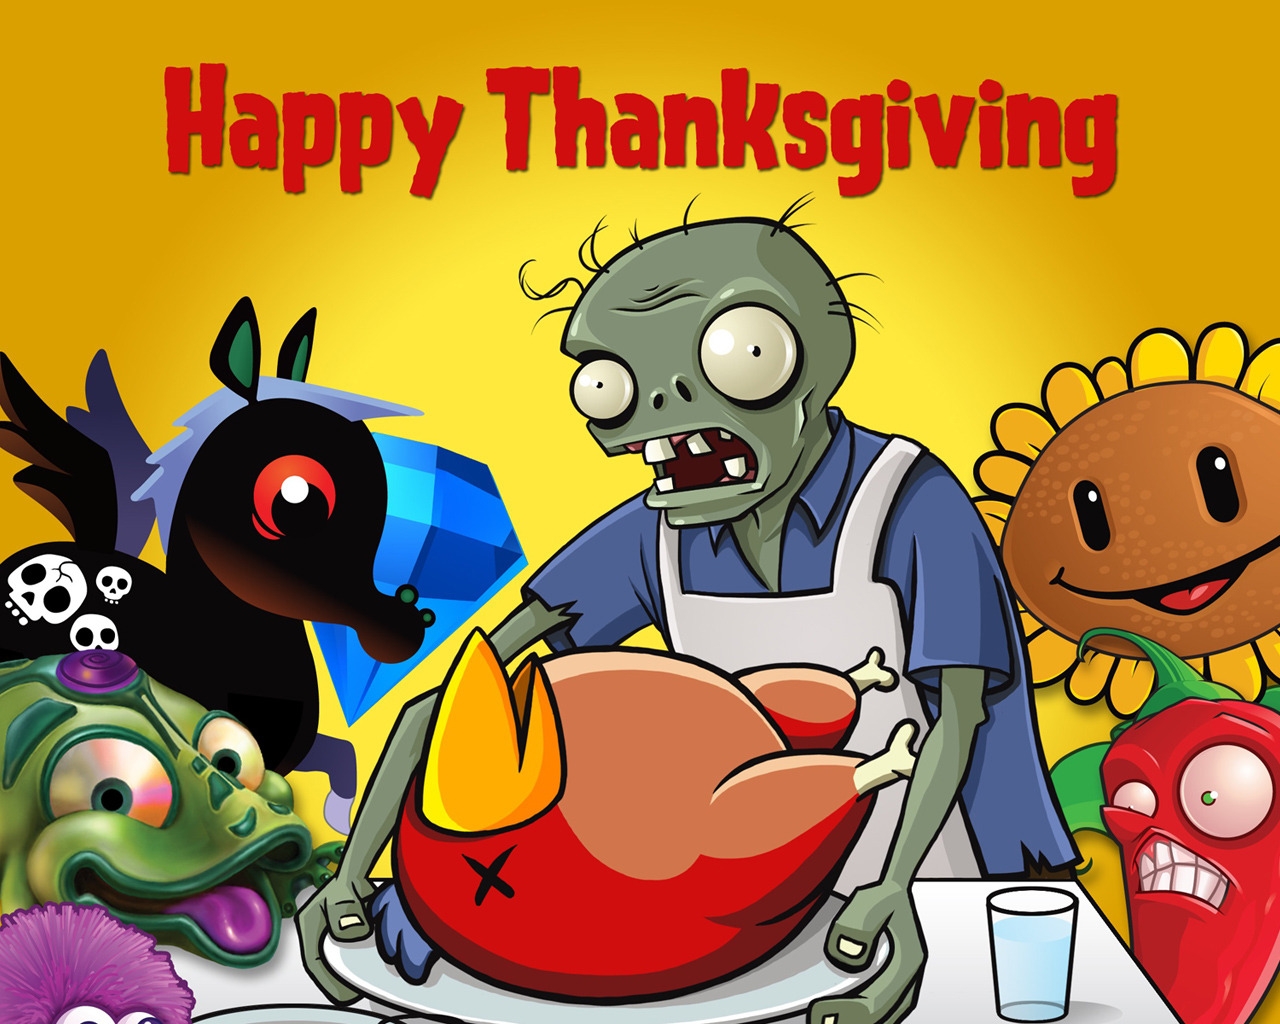 Happy Thanksgiving for 1280 x 1024 resolution